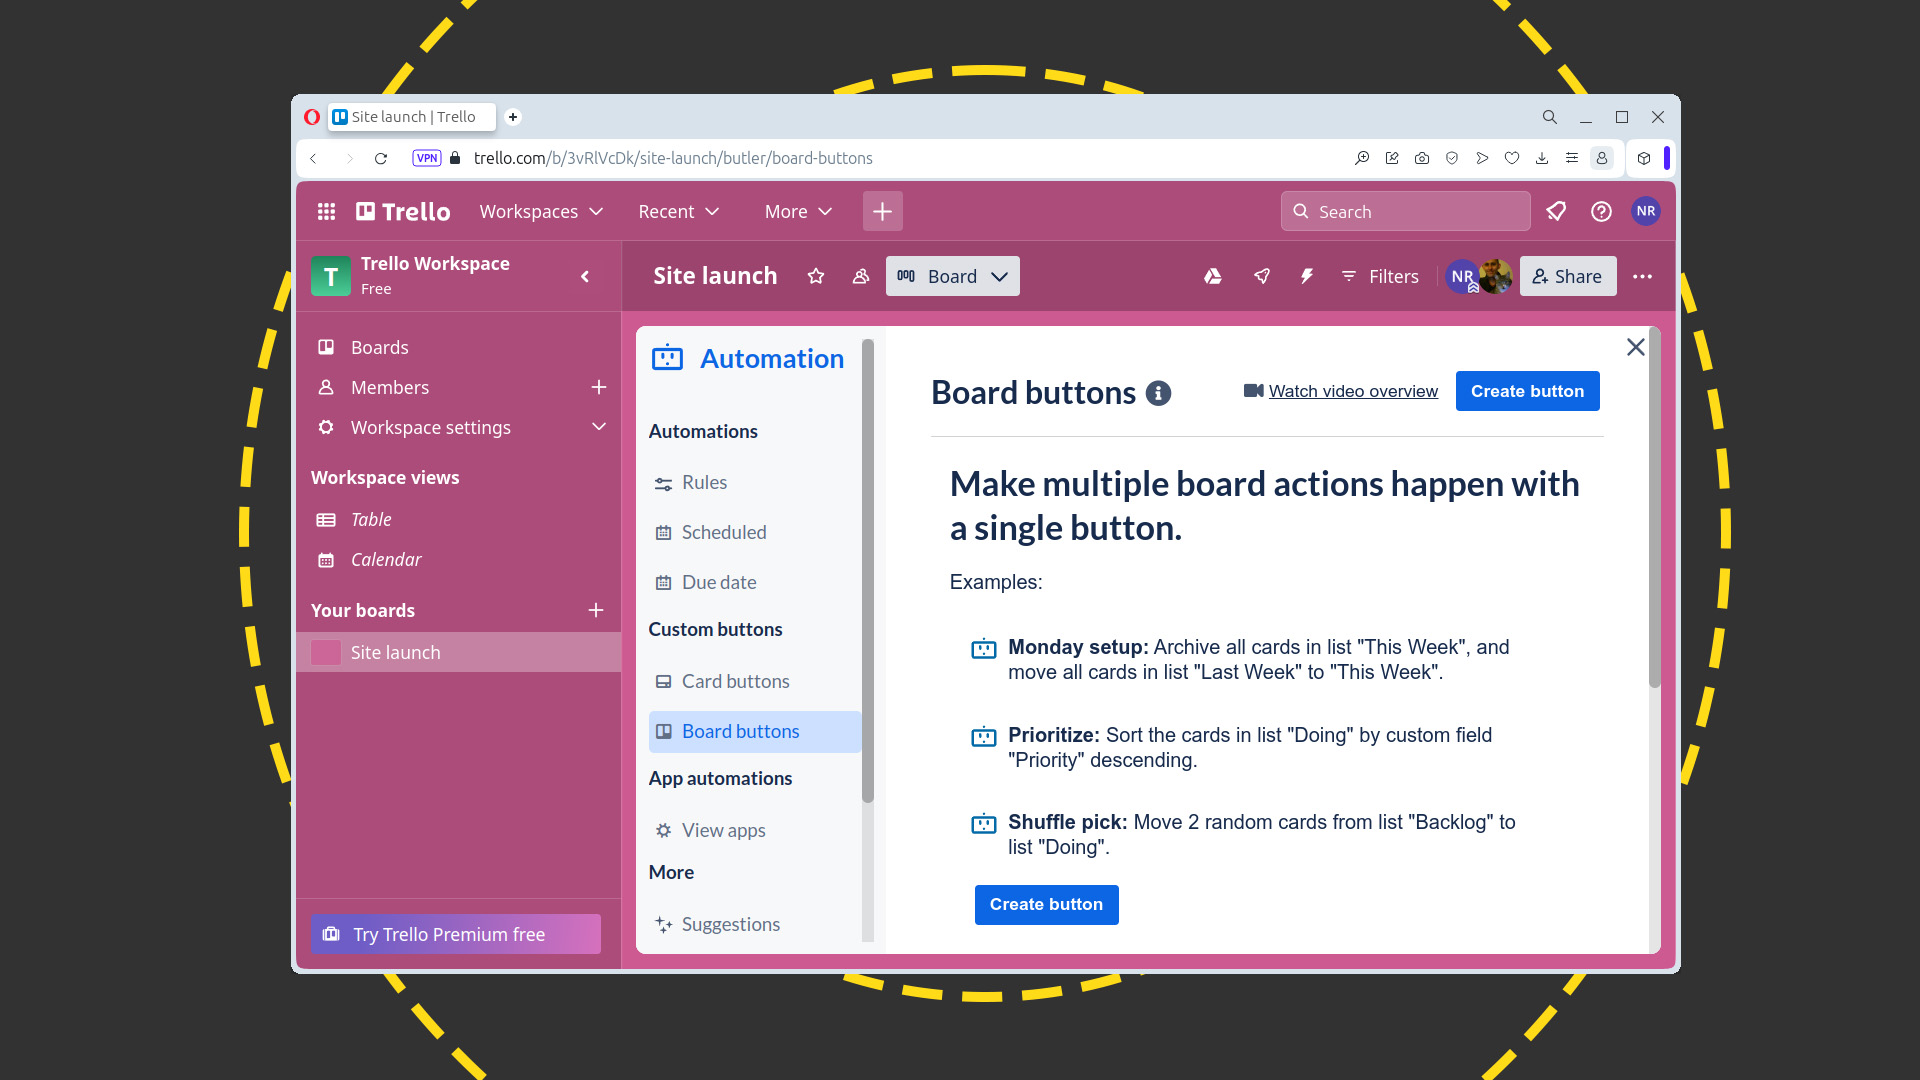 Trello's low-code environment simplifies the task of building buttons and automations.